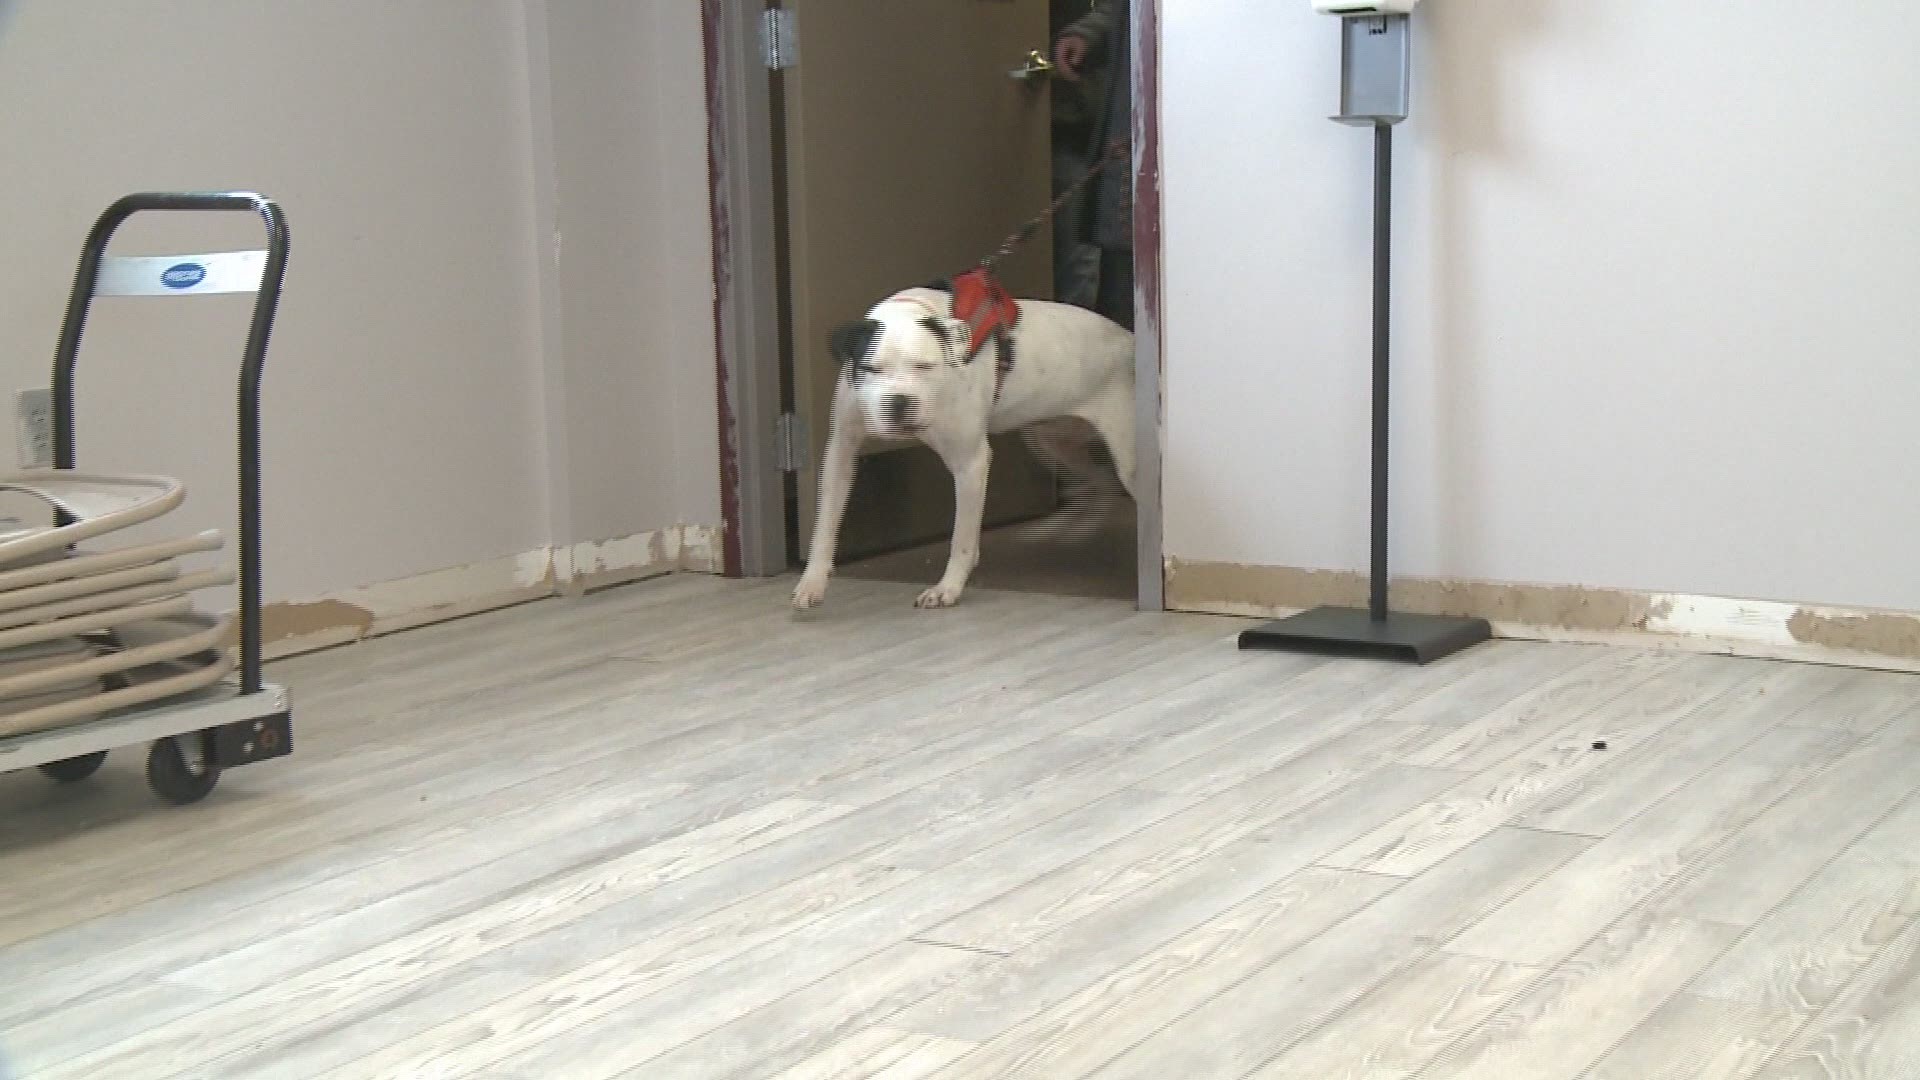 An adorable pooch named Kane who spent more than 300 days at an animal shelter in South Bend, Indiana has finally found his forever home.